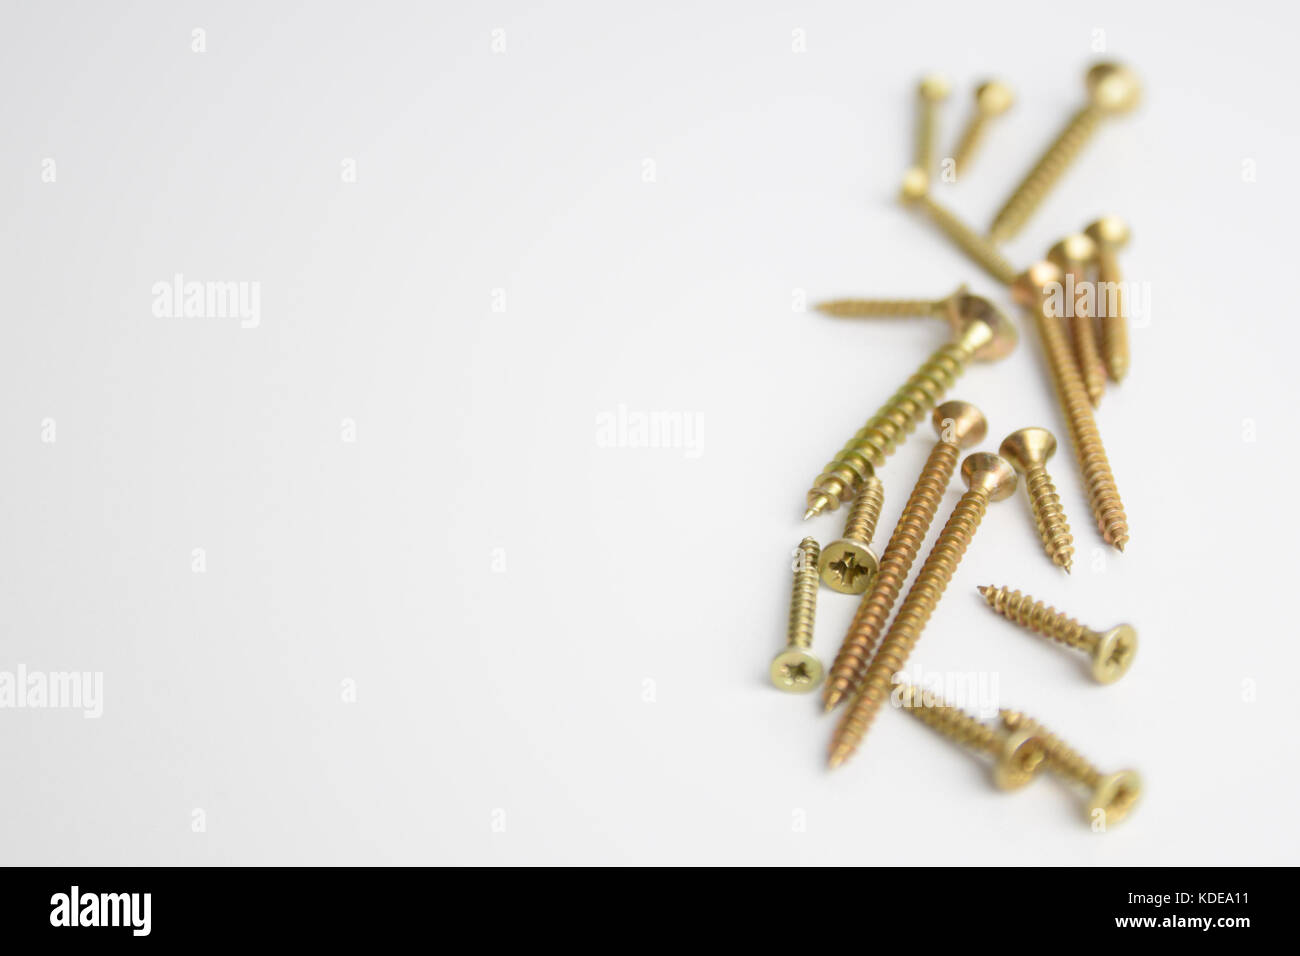 Pile of brass screws placed on a white background with shallow depth of field Stock Photo